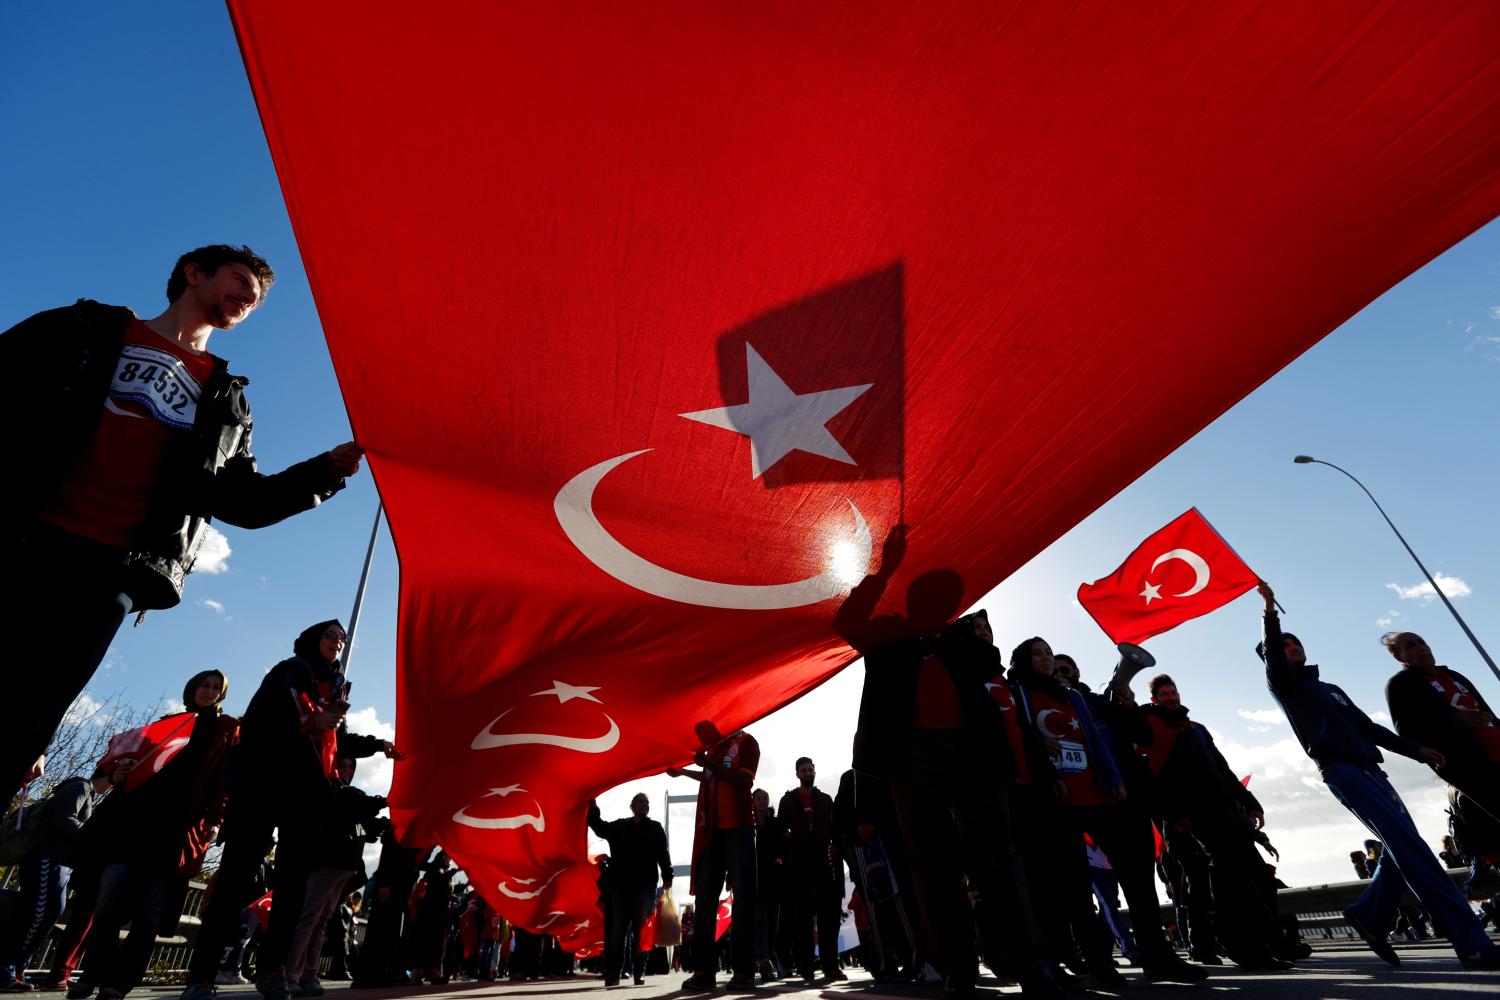 People march with a huge Turkish flag on the July 15 Martyrs' Bridge, known as the Bosphorus Bridge, which links the city's European and Asian sides, during the 38th annual Istanbul Marathon in Istanbul, Turkey, November 13, 2016. REUTERS/Murad Sezer - RTX2TF57